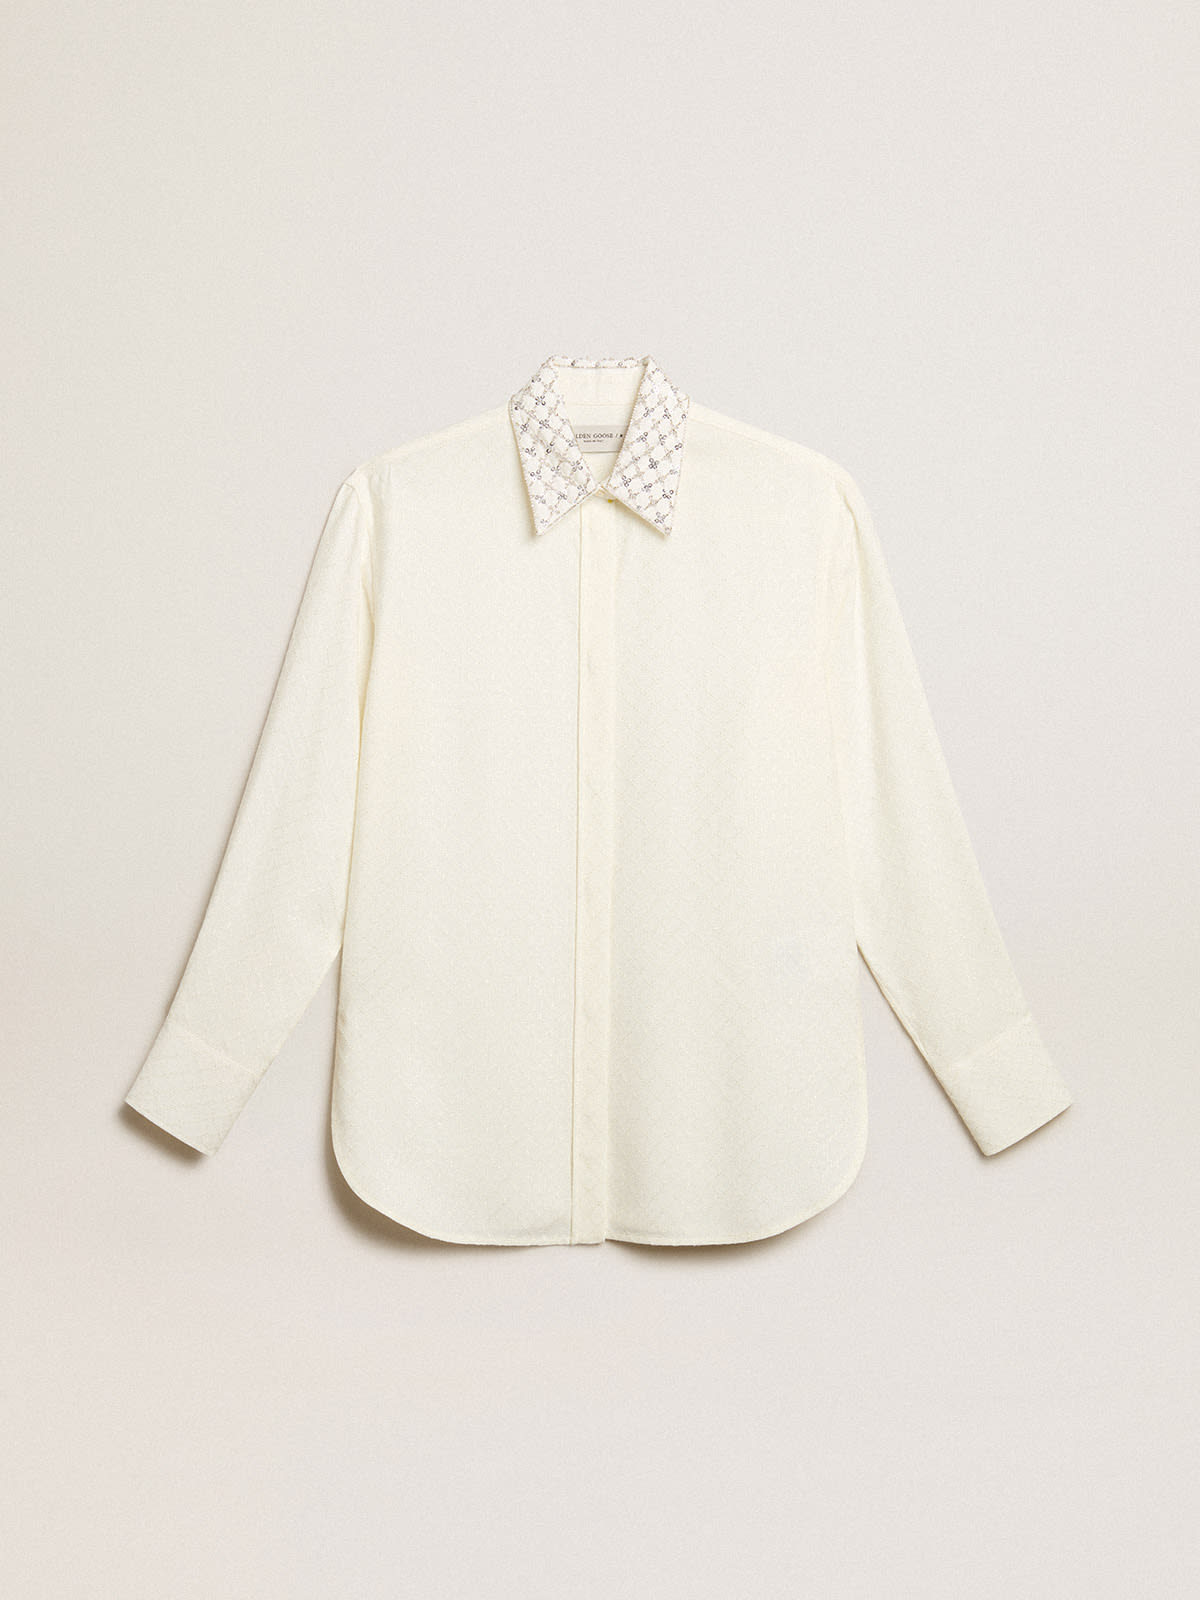 Golden Goose - Shirt in vintage white with jacquard design and embroidery in 